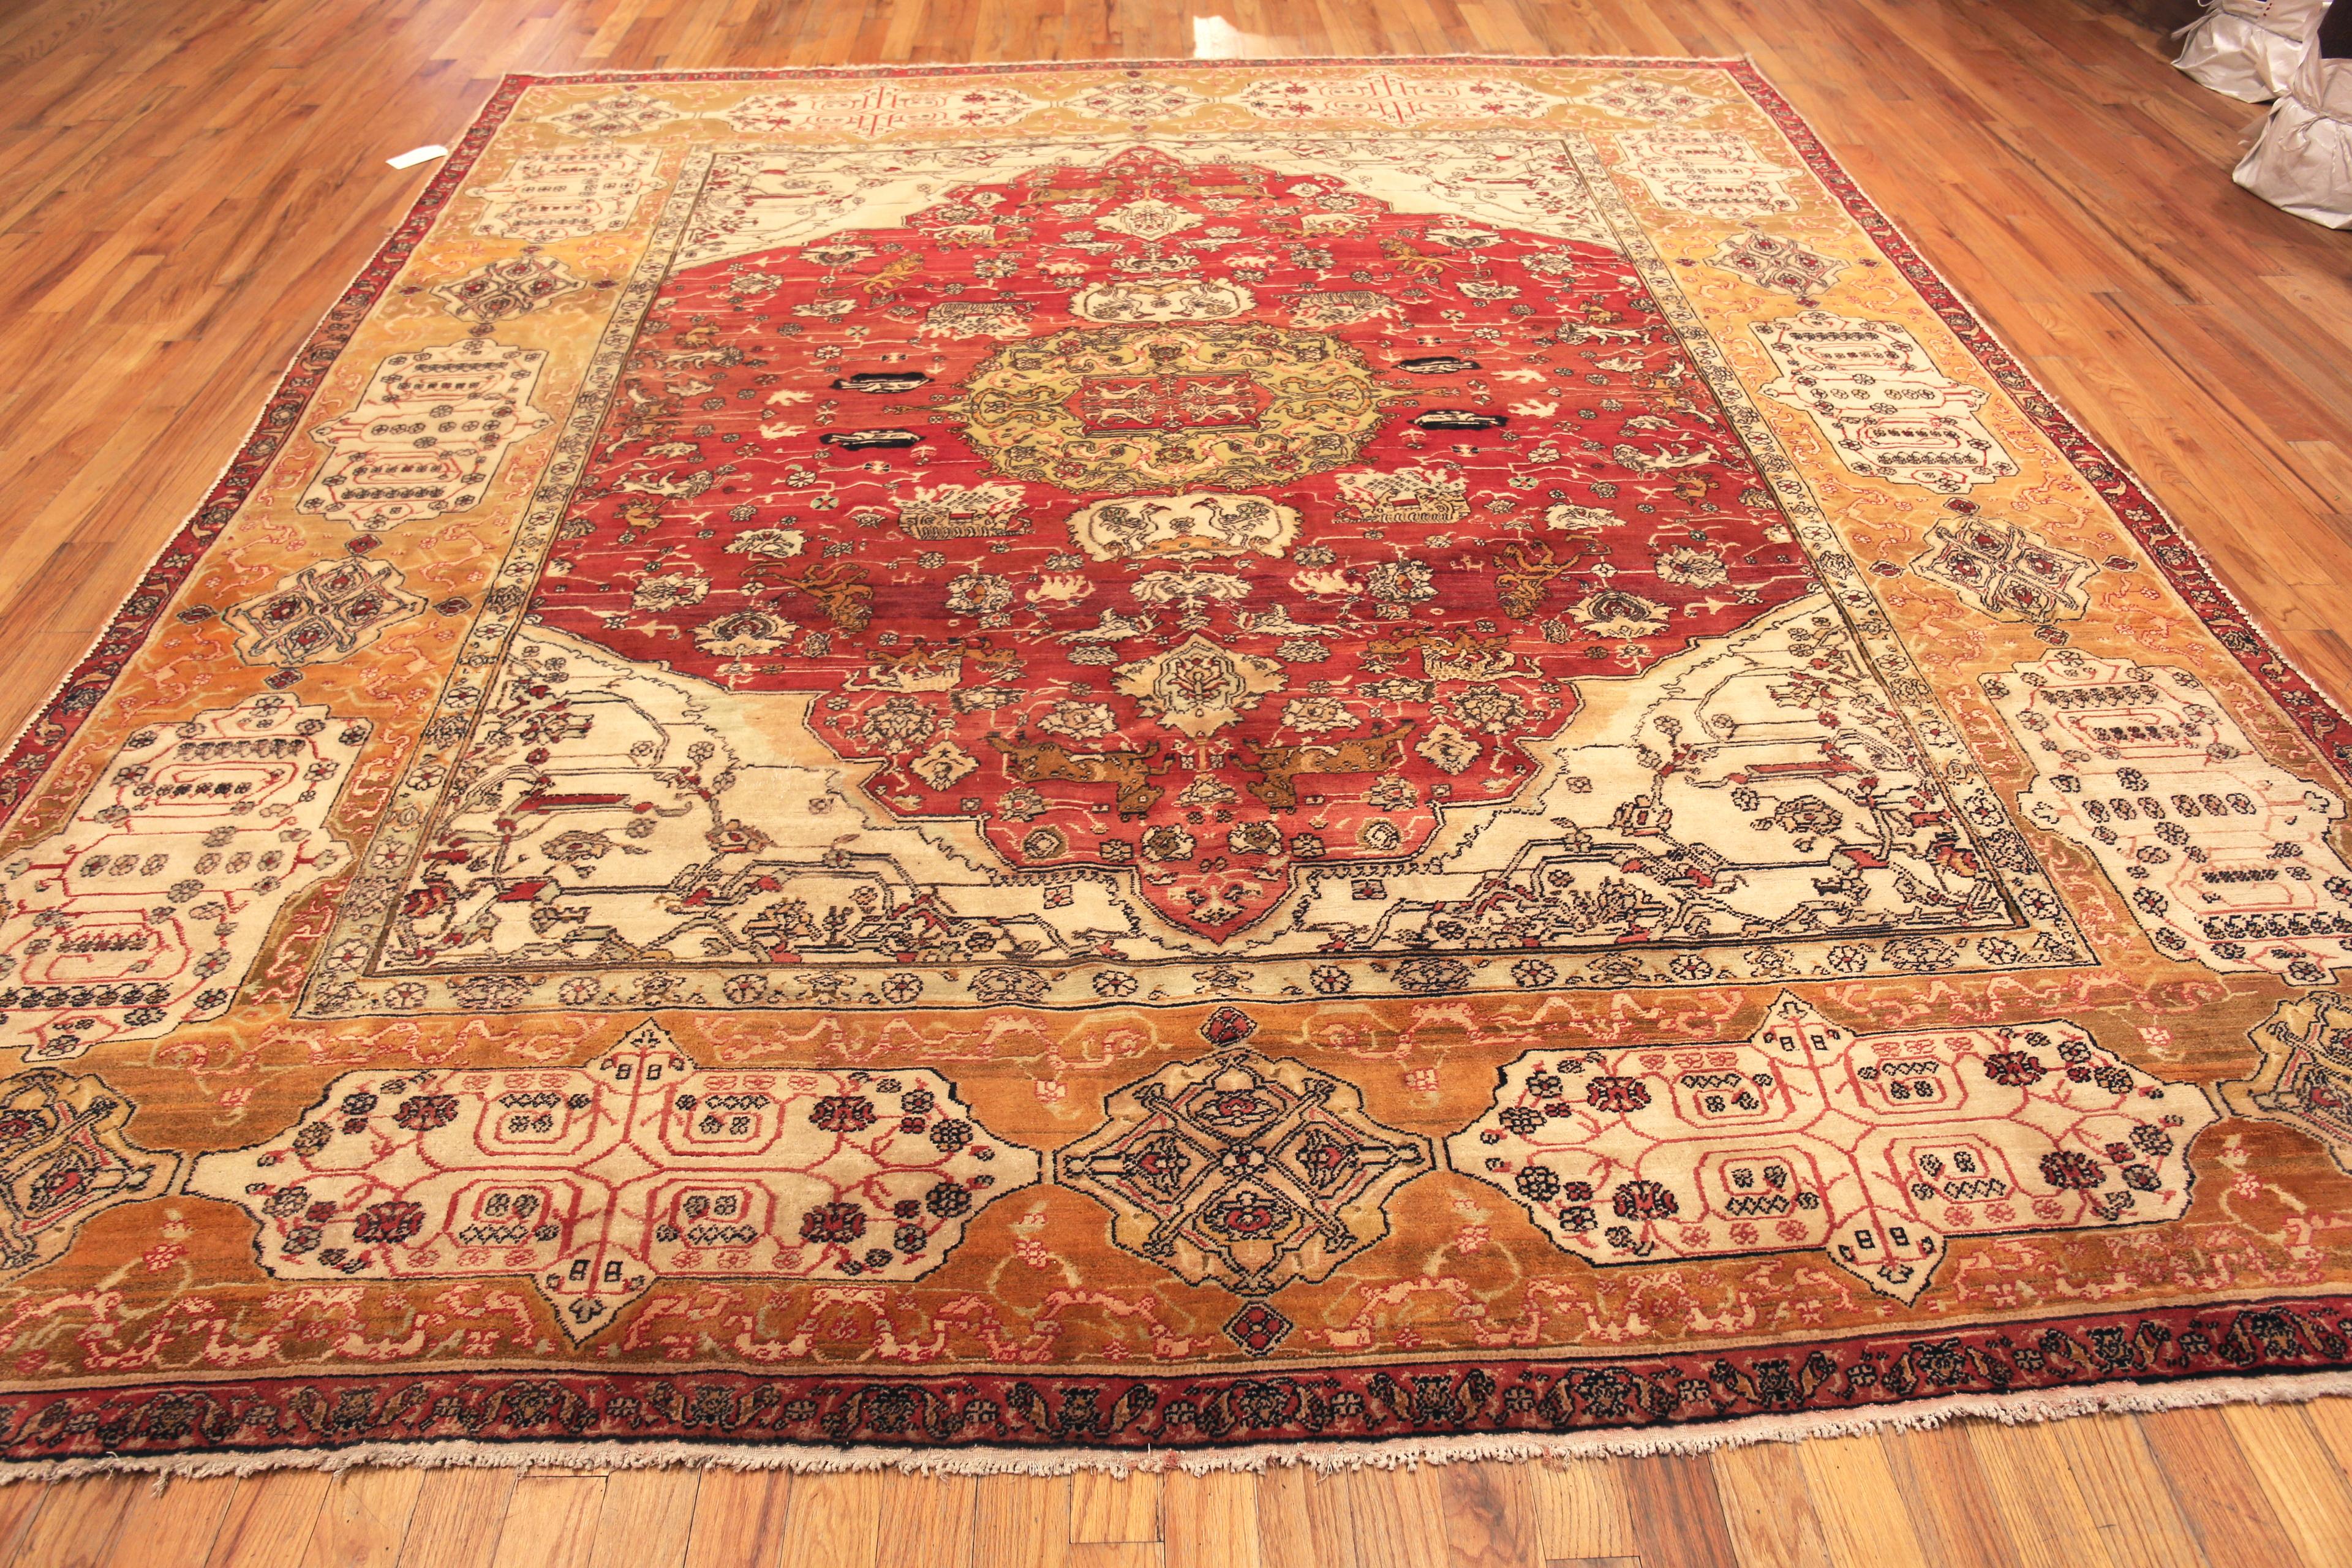 Animal Design Antique Indian Agra Rug, Country of Origin: India. Circa date: 1880. Size: 10 ft 9 in x 12 ft 4 in (3.28 m x 3.76 m)